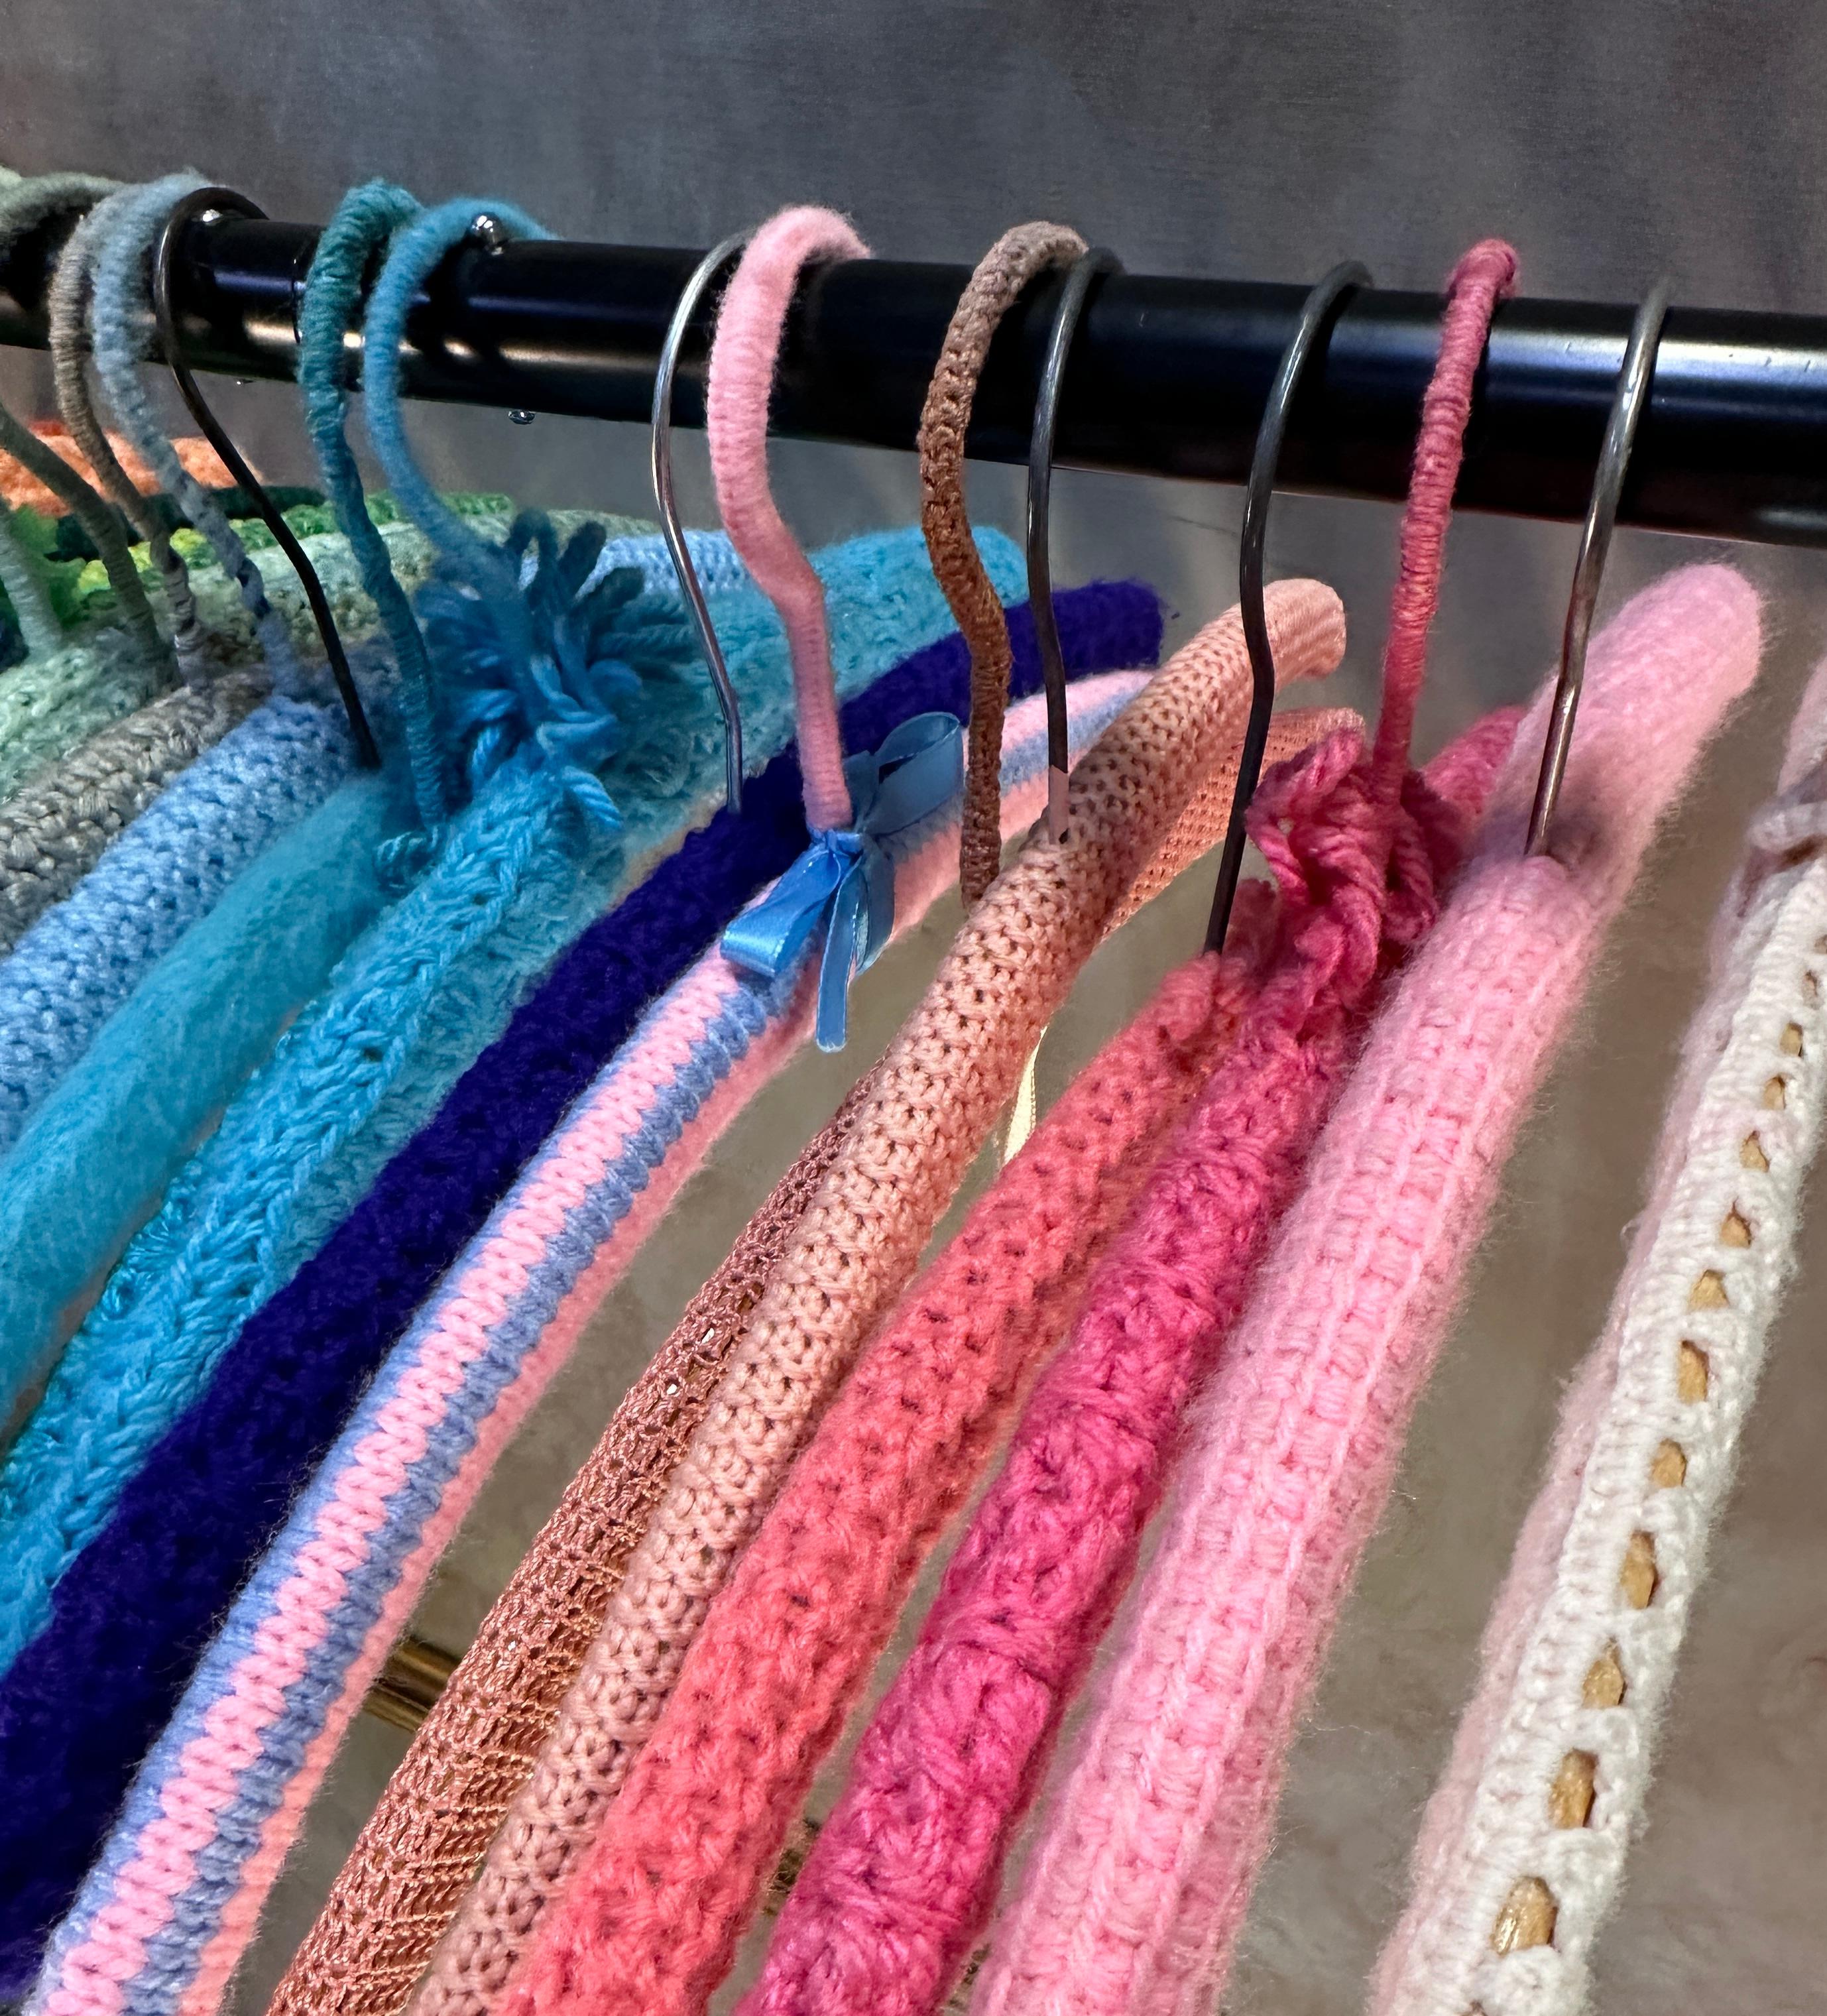 Hand Crocheted/Knitted Wooden Hangers